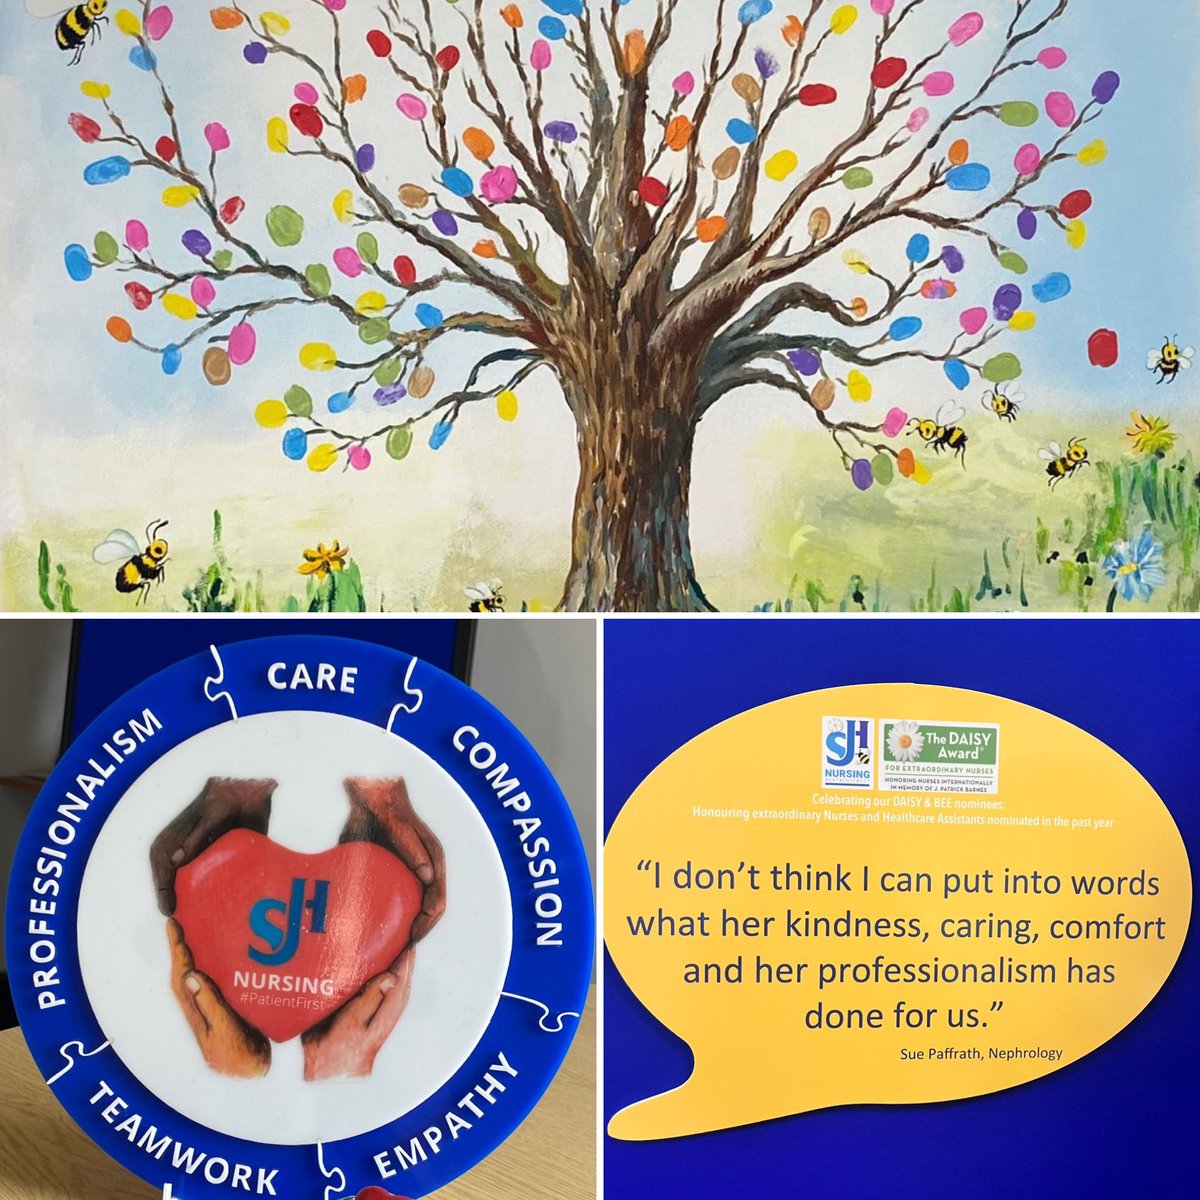 Happy #IND2024 🇮🇪🌎 Thank you #SJHNursing #SJHHCA 🌸 Promising to sustain our celebrations in recognising & valuing each other 🌼 #SJHNursing through our Professional Practice Model 🧩Care 🧩Empathy 🧩Compassion 🧩Teamwork 🧩Professionalism 🟰 #SJHNursing #INDSJH24